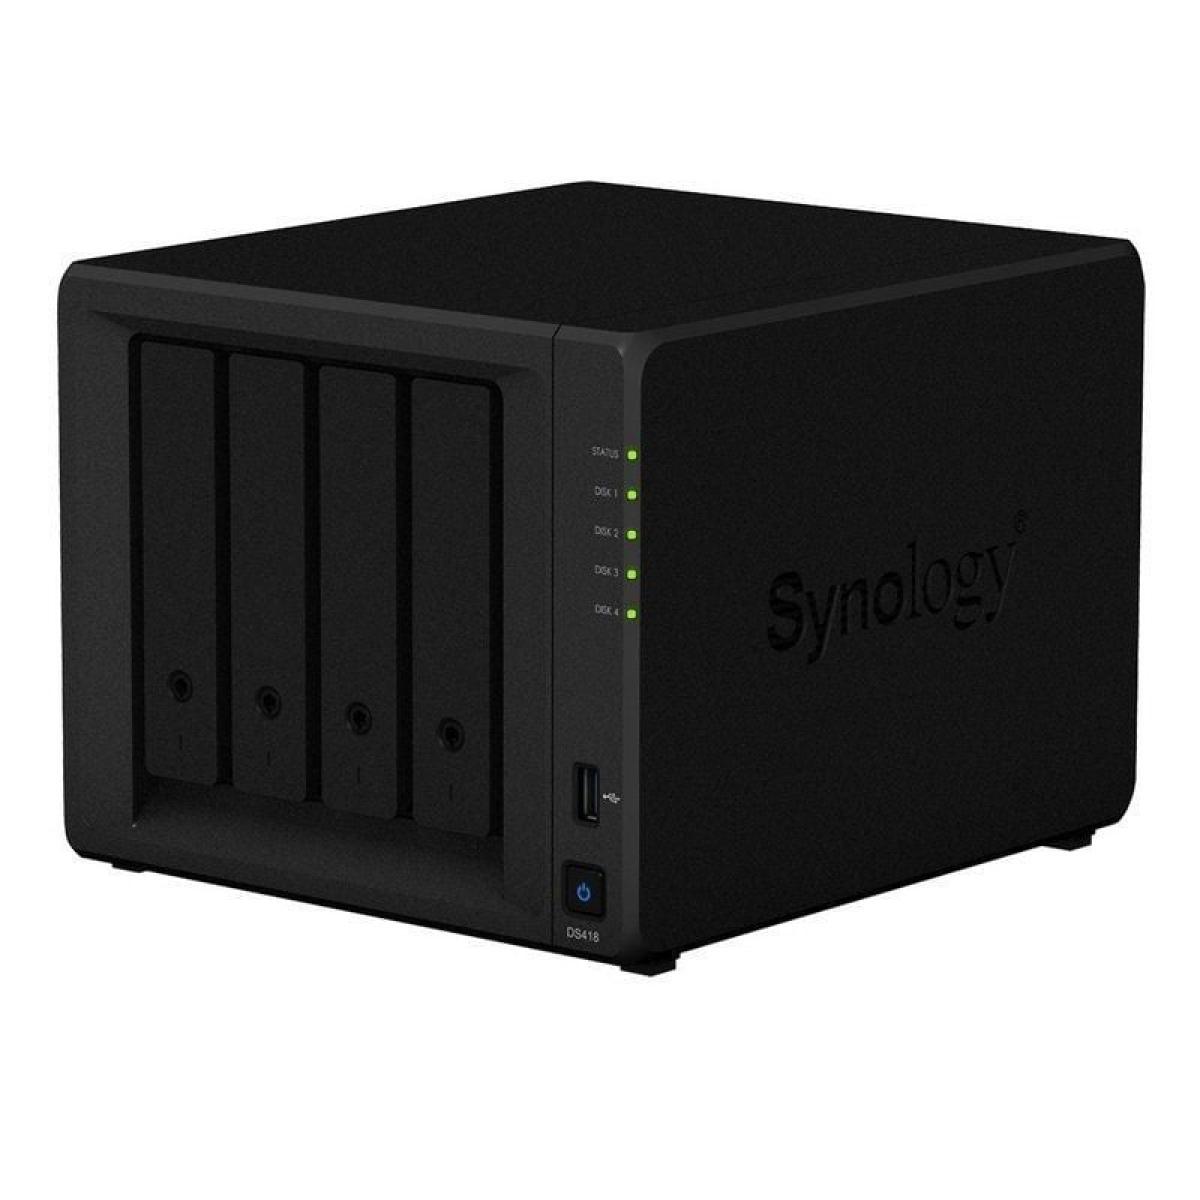 NAS SYNOLOGY DISKSTATION DS418/ 4 BAHIAS 3.5"- 2.5"/ 2GB DDR4/ FORMATO TORRE